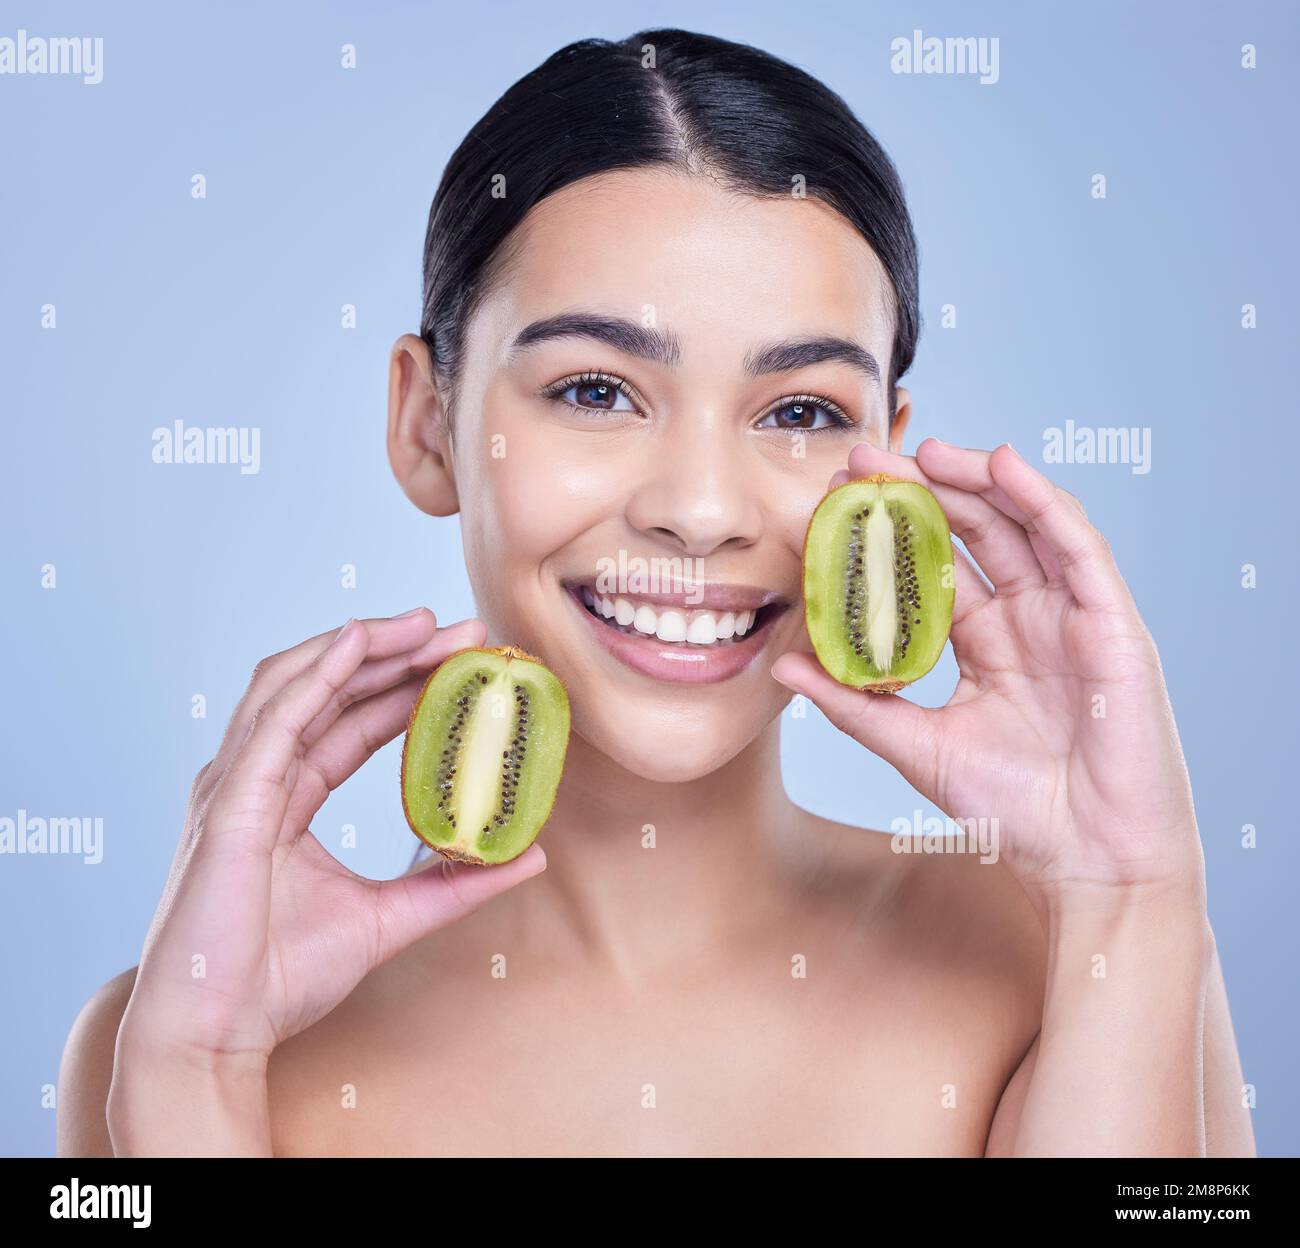 Studio Portrait of a happy smiling mixed race woman holding a kiwi fruit. Hispanic model promoting the skin benefits of a healthy diet against a blue Stock Photo